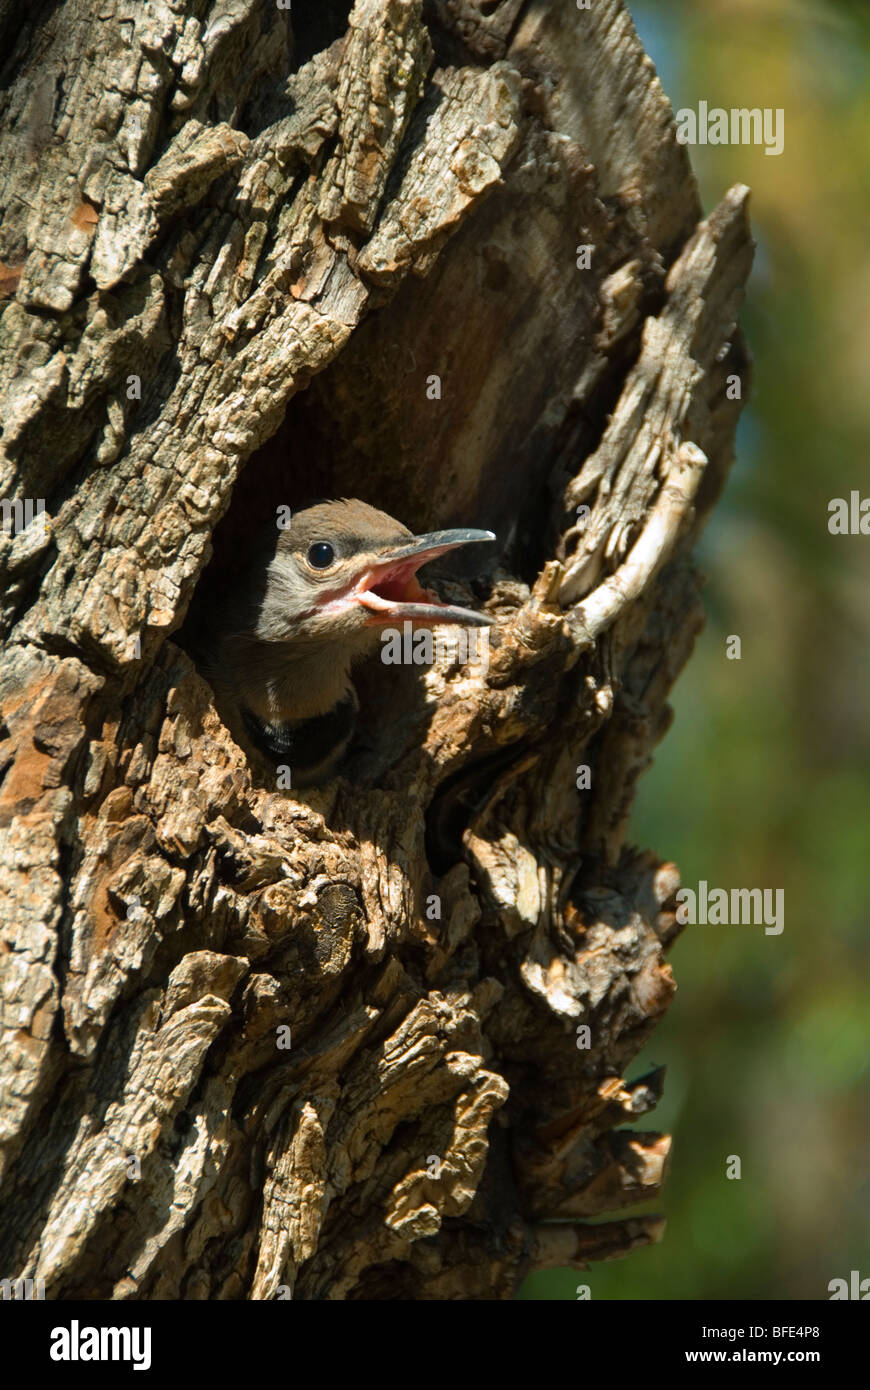 A Red-shafted flicker peers out from a nest at Okanagan Falls Provincial Park in British Columbia, Canada Stock Photo